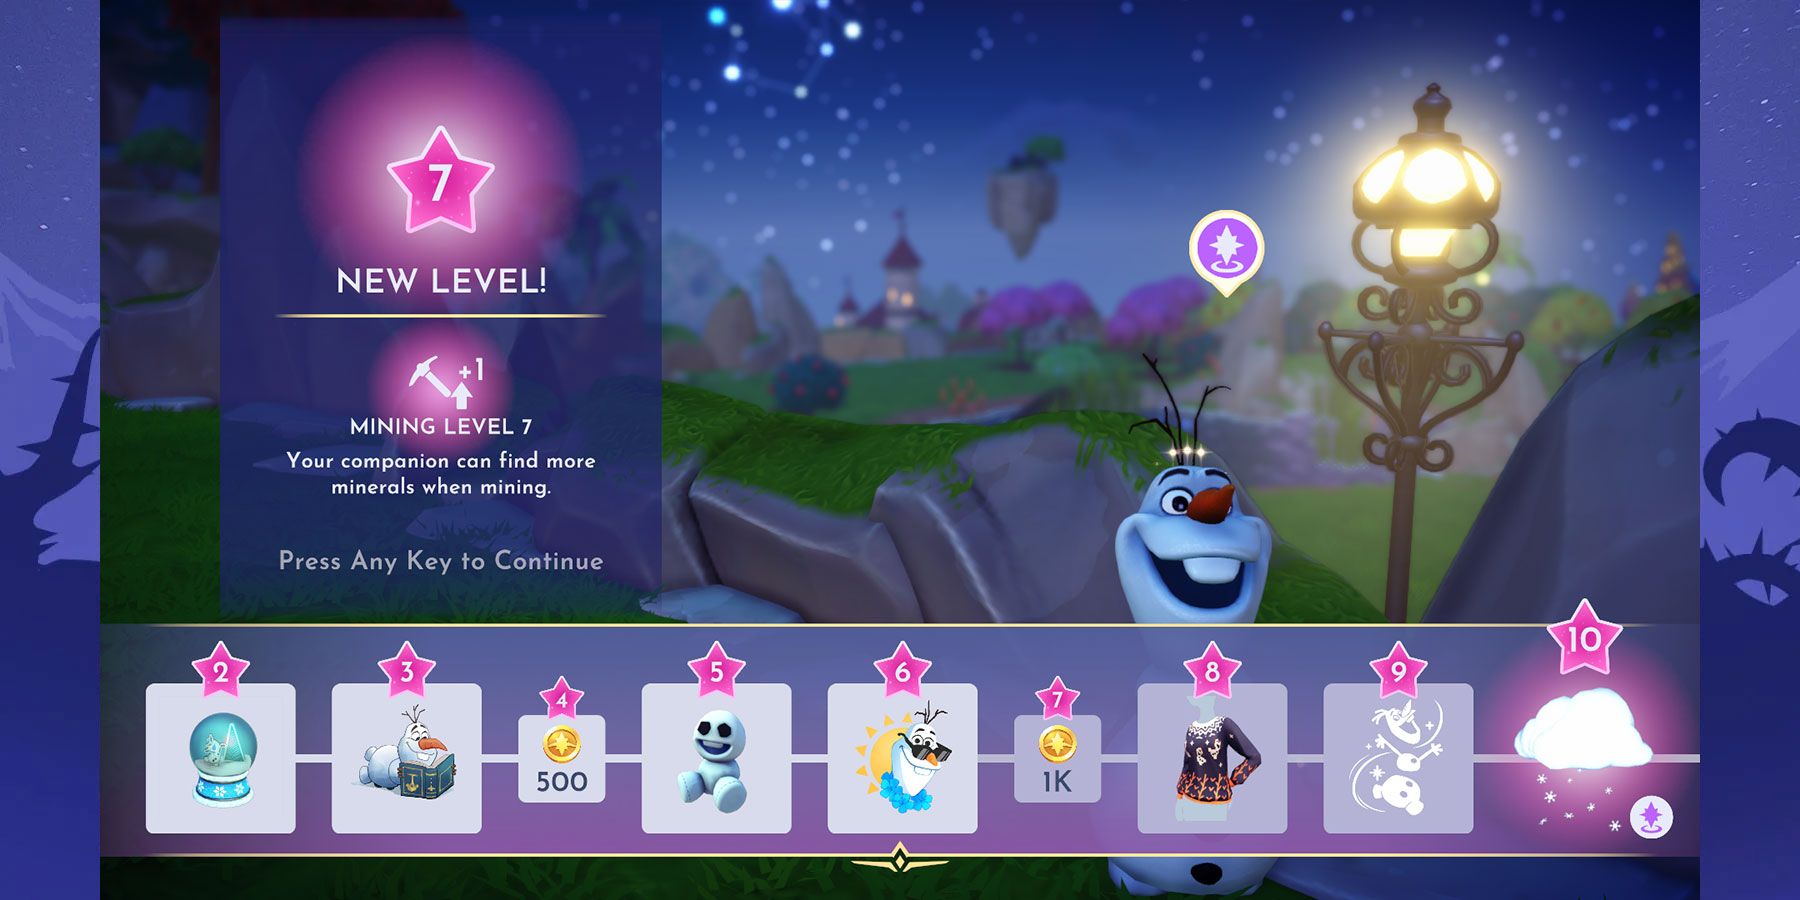 Role of a Lifetime quest in Disney Dreamlight Valley.